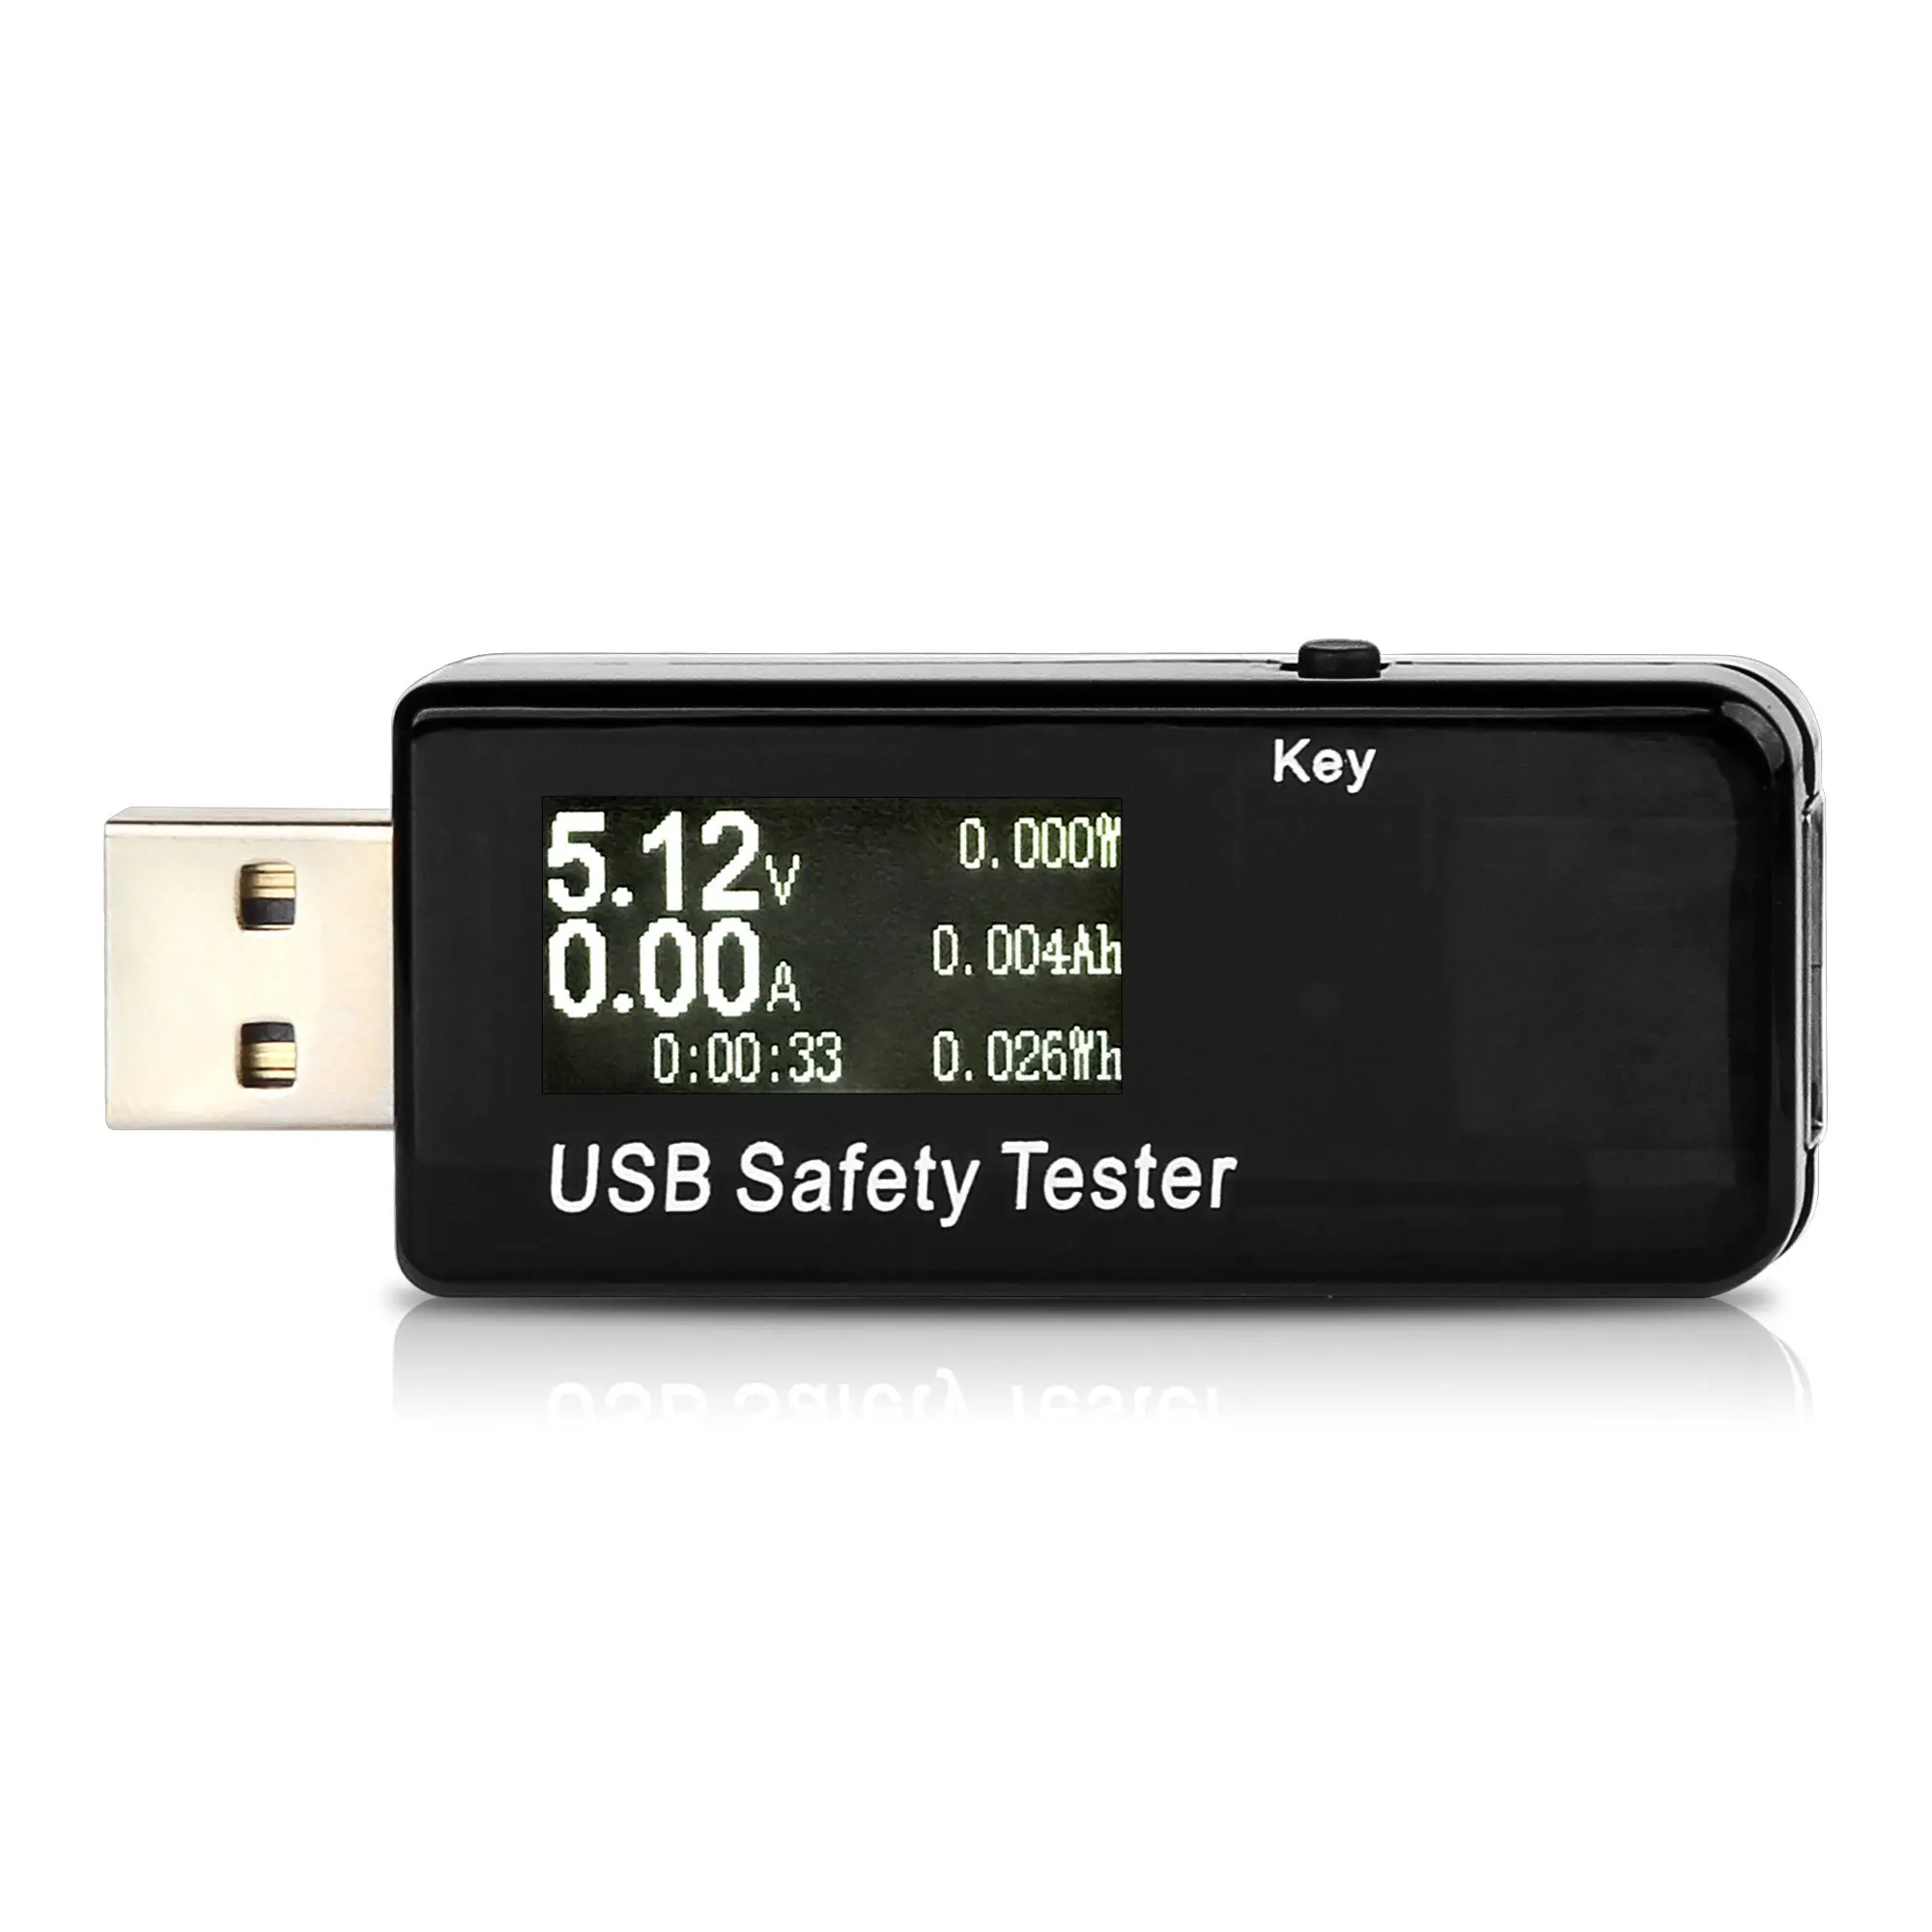 Cables Eversame USB Digital Power Meter Tester Multimeter Current and Voltage Monitor Test Speed of Chargers DC 5.1A 30V Amp Voltage Power Meter Capacity of Power Banks-Black